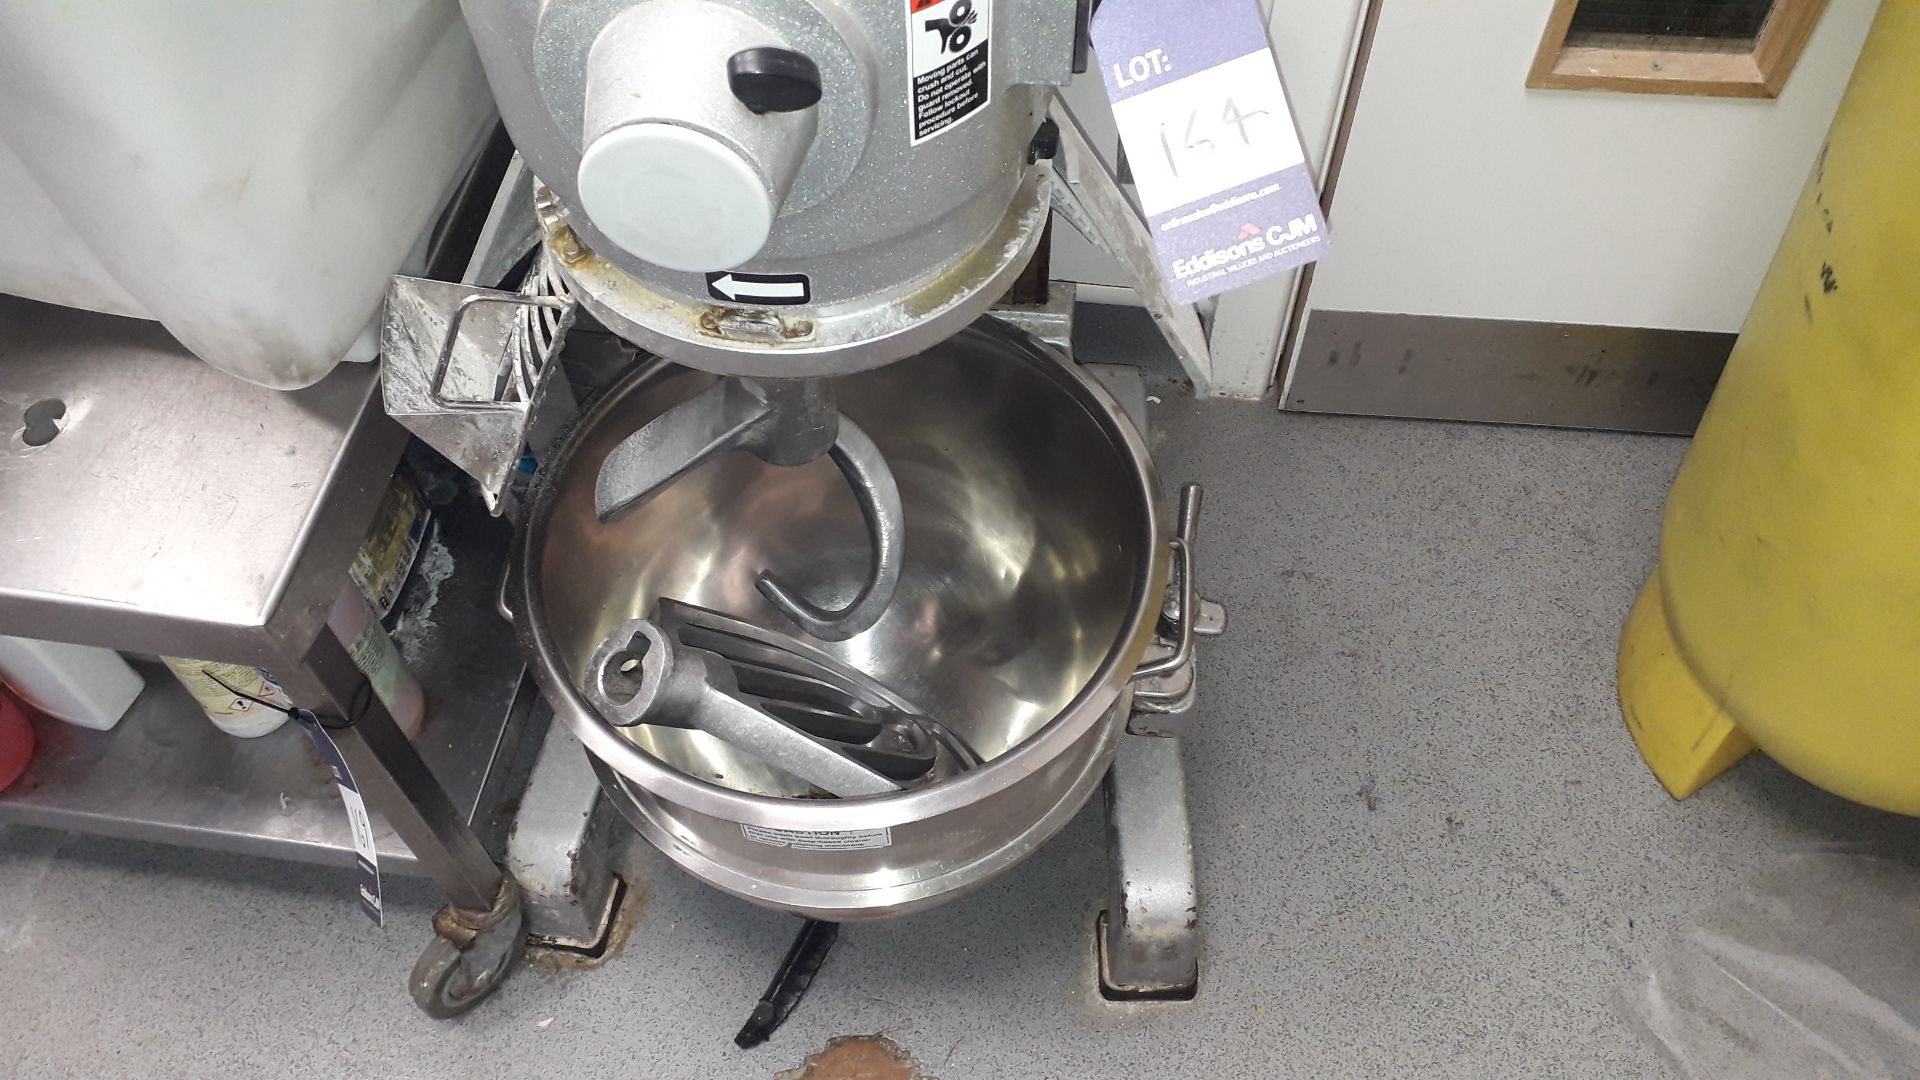 Metcalfe Stainless Steel 30Ltr Heavy Duty Spiral Dough Mixer Serial Number SP30HI/160887/GS 415v, - Image 3 of 6